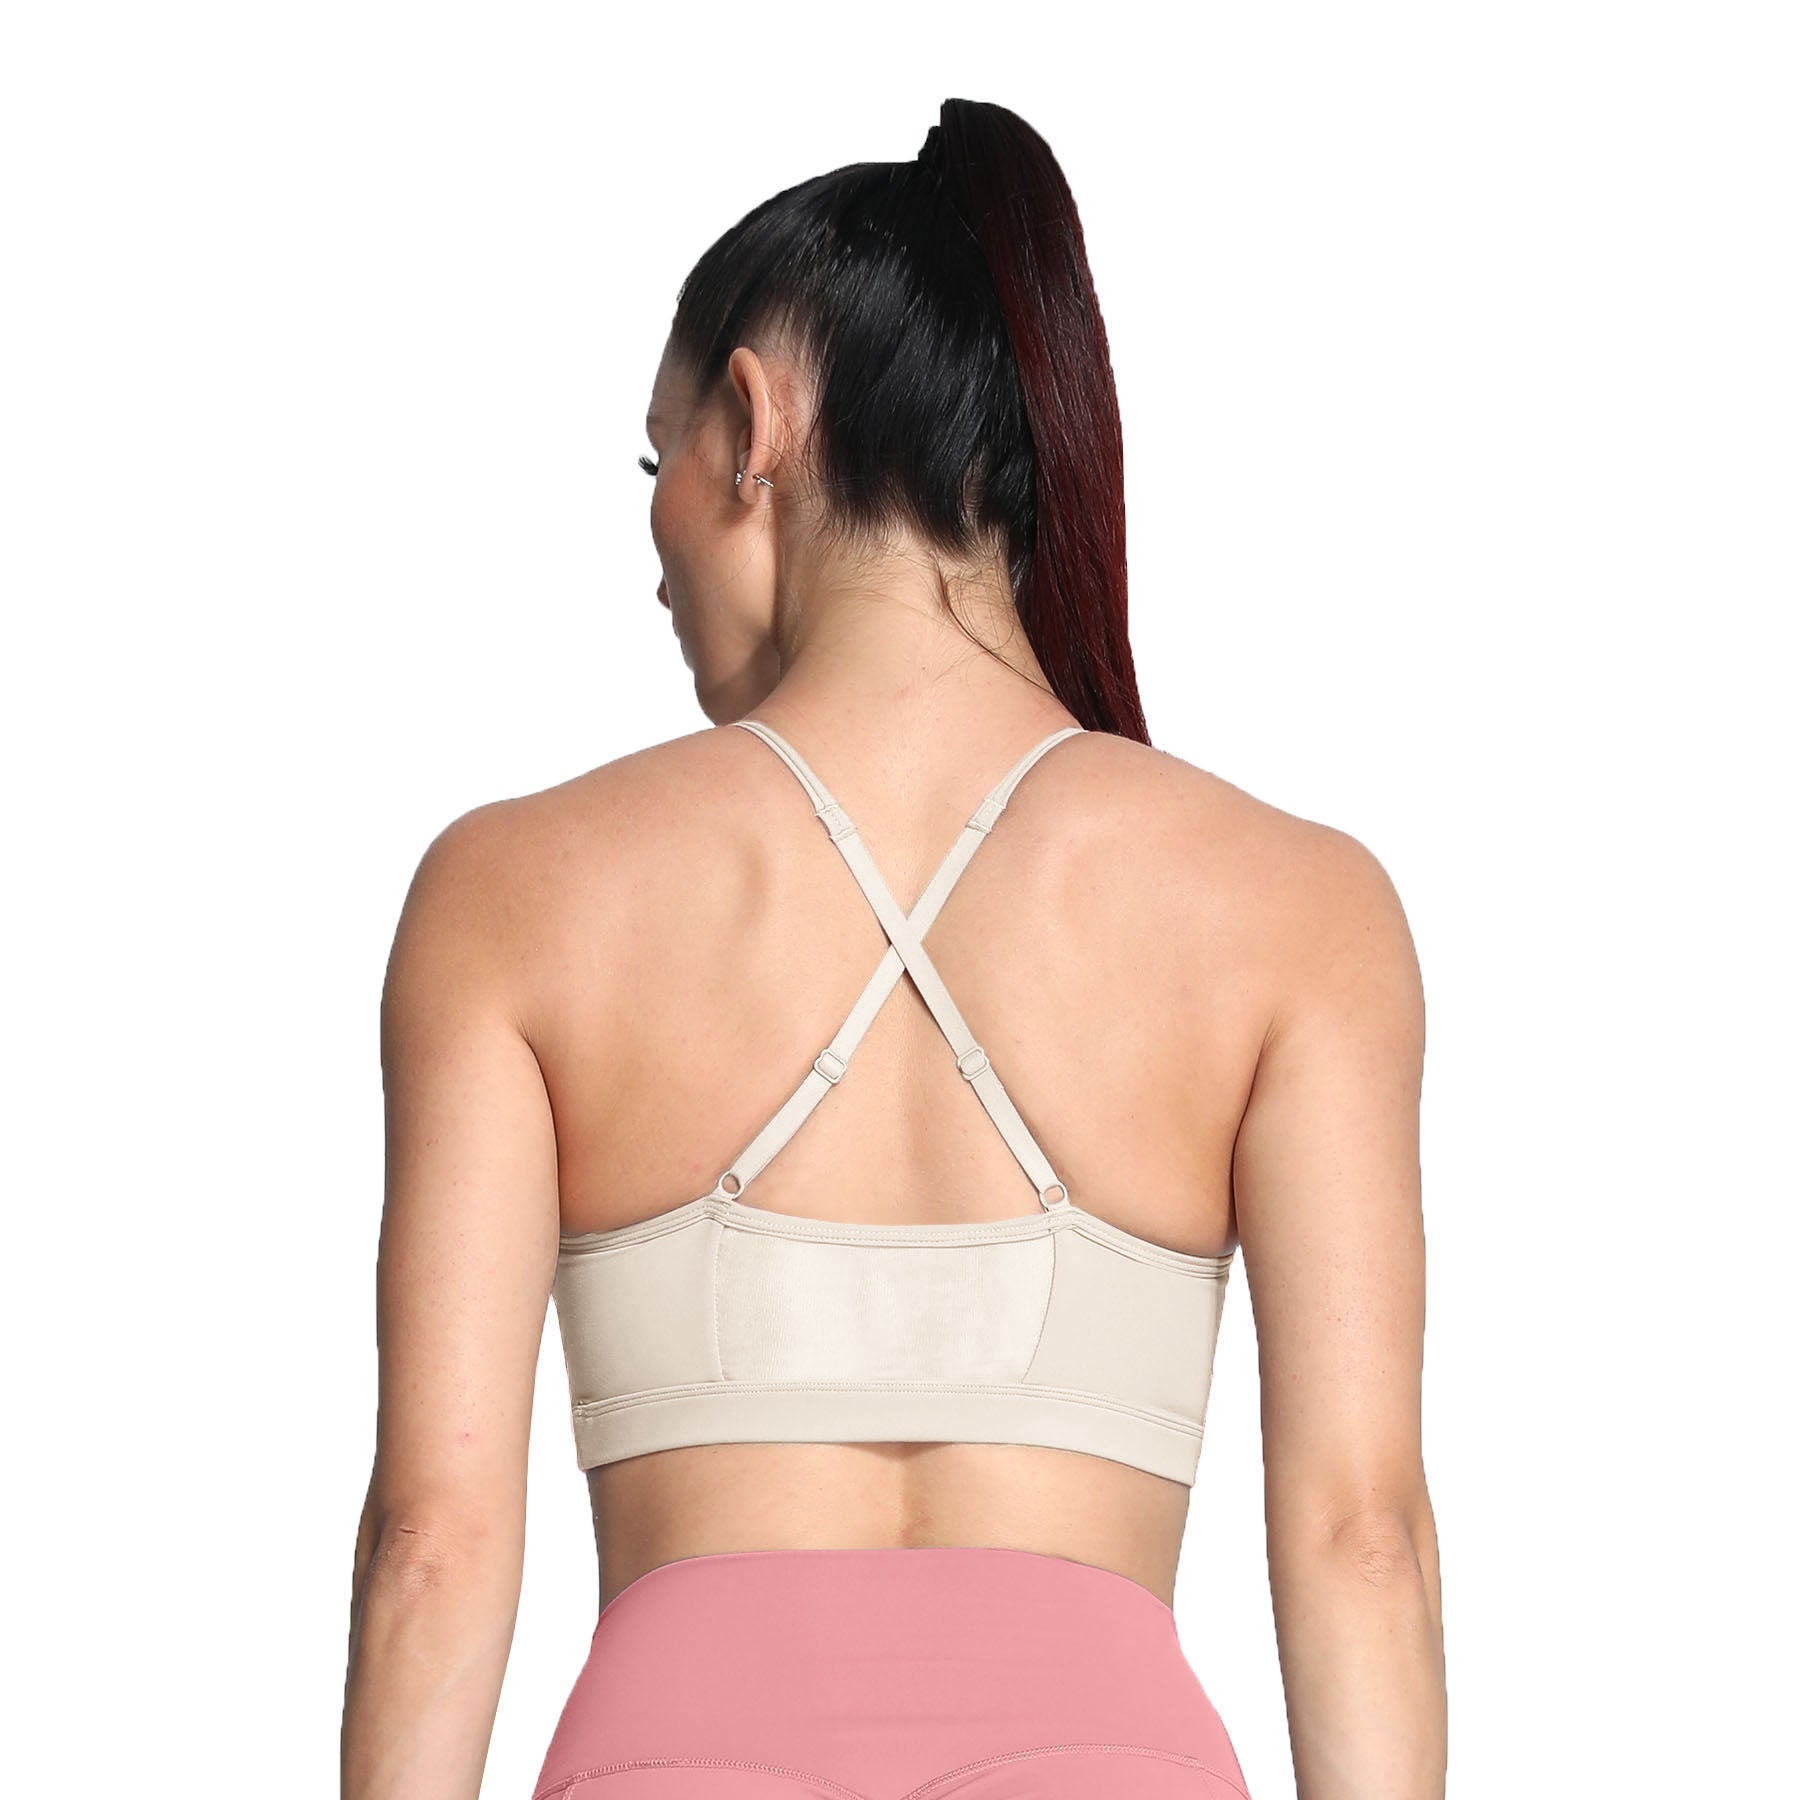 It is time for the next chapter 🤍 Activewear is from @aoxjox Sport bra -  backless padded sport bra Shorts - seamless tie-dye lifting